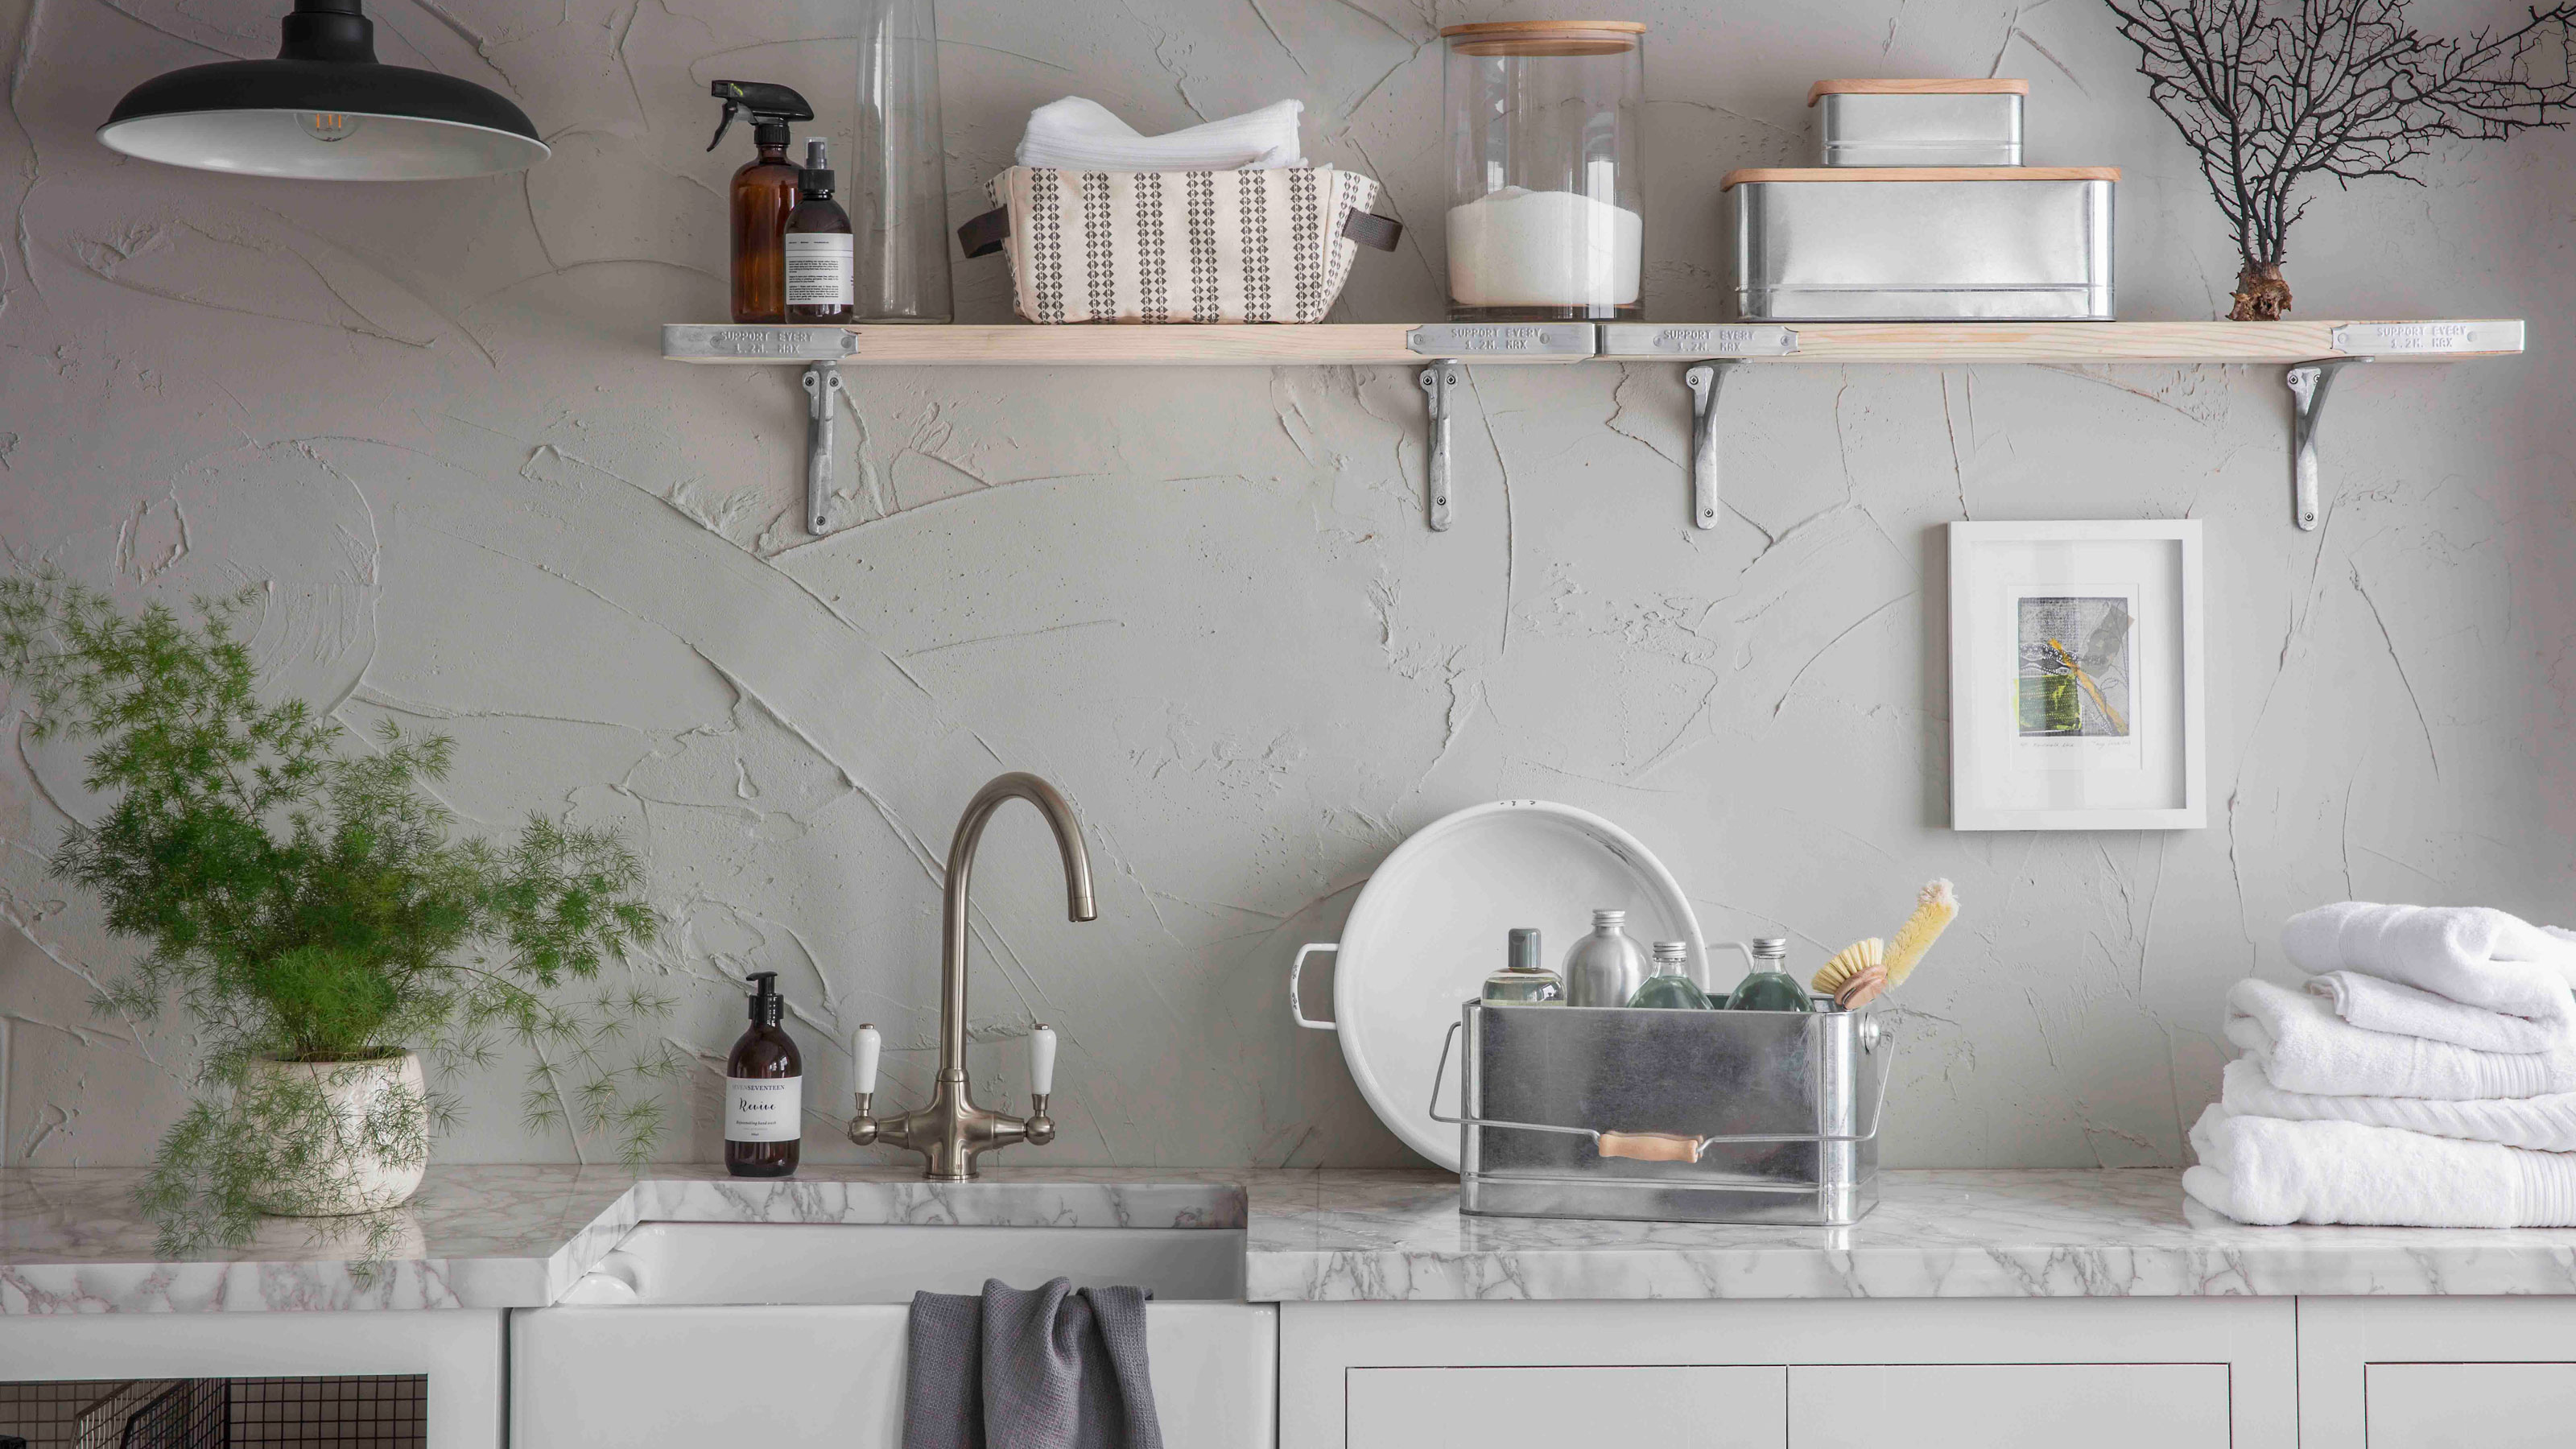 Utility room ideas: 22 inspiring ways to organise yours